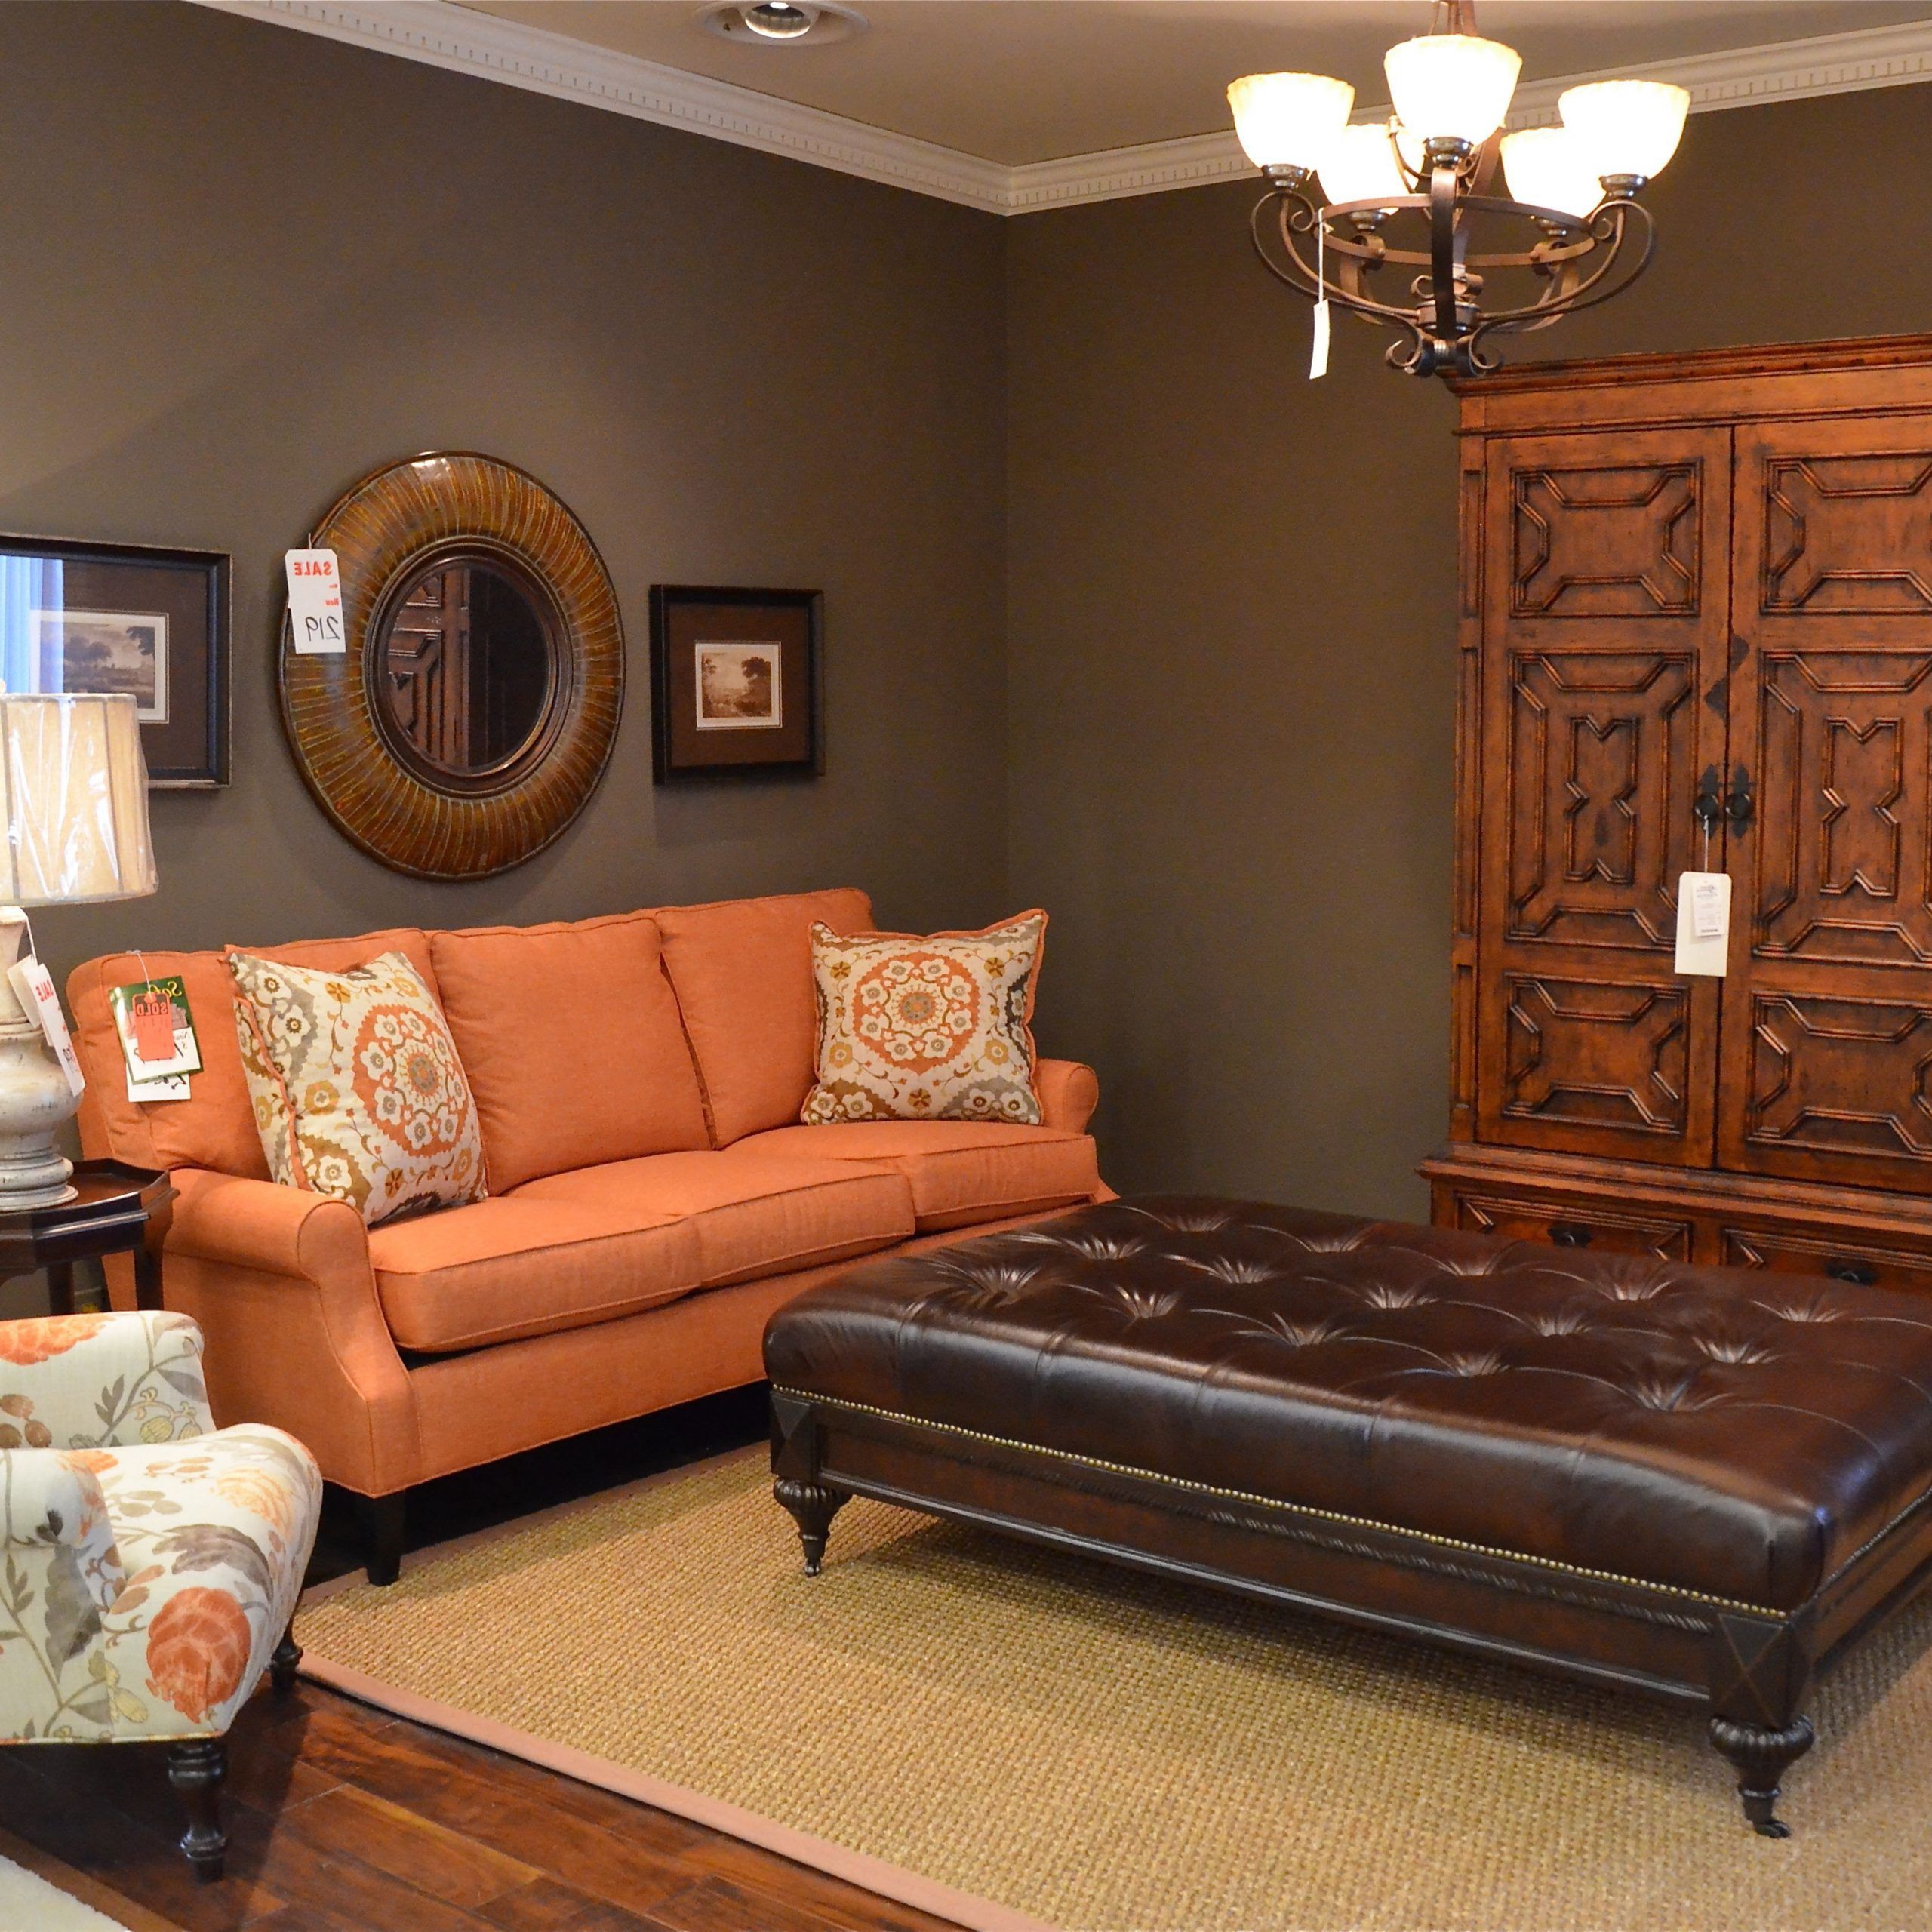 Leather Ottoman Gives An Eclectic Feel To A Formal Space With Oriental For Fashionable Tuxedo Ottomans (View 4 of 10)